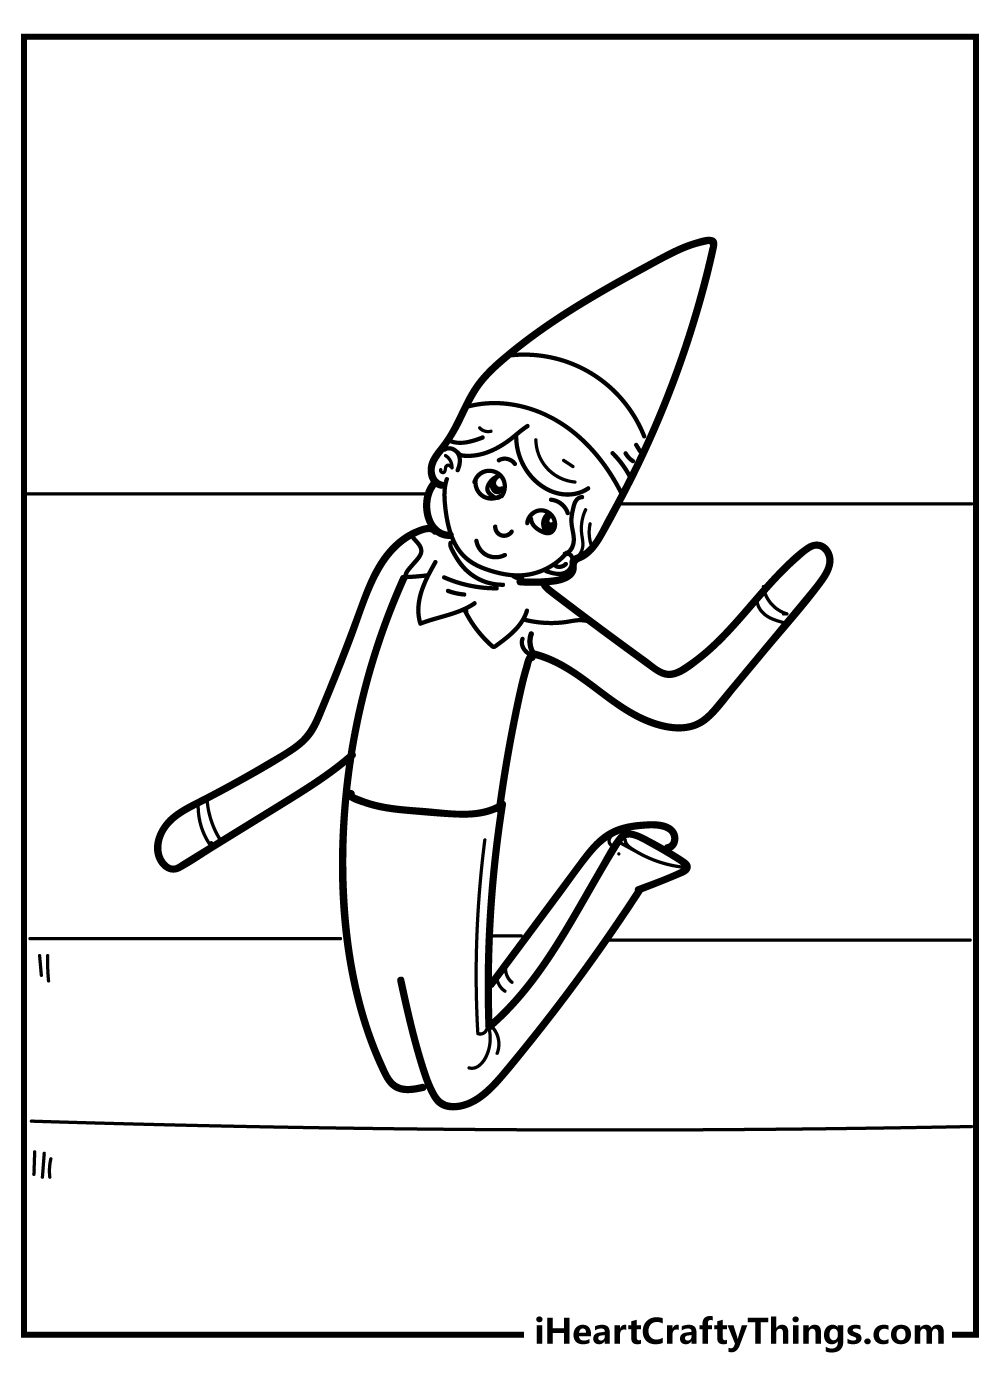 Elf on the shelf coloring pages free printable